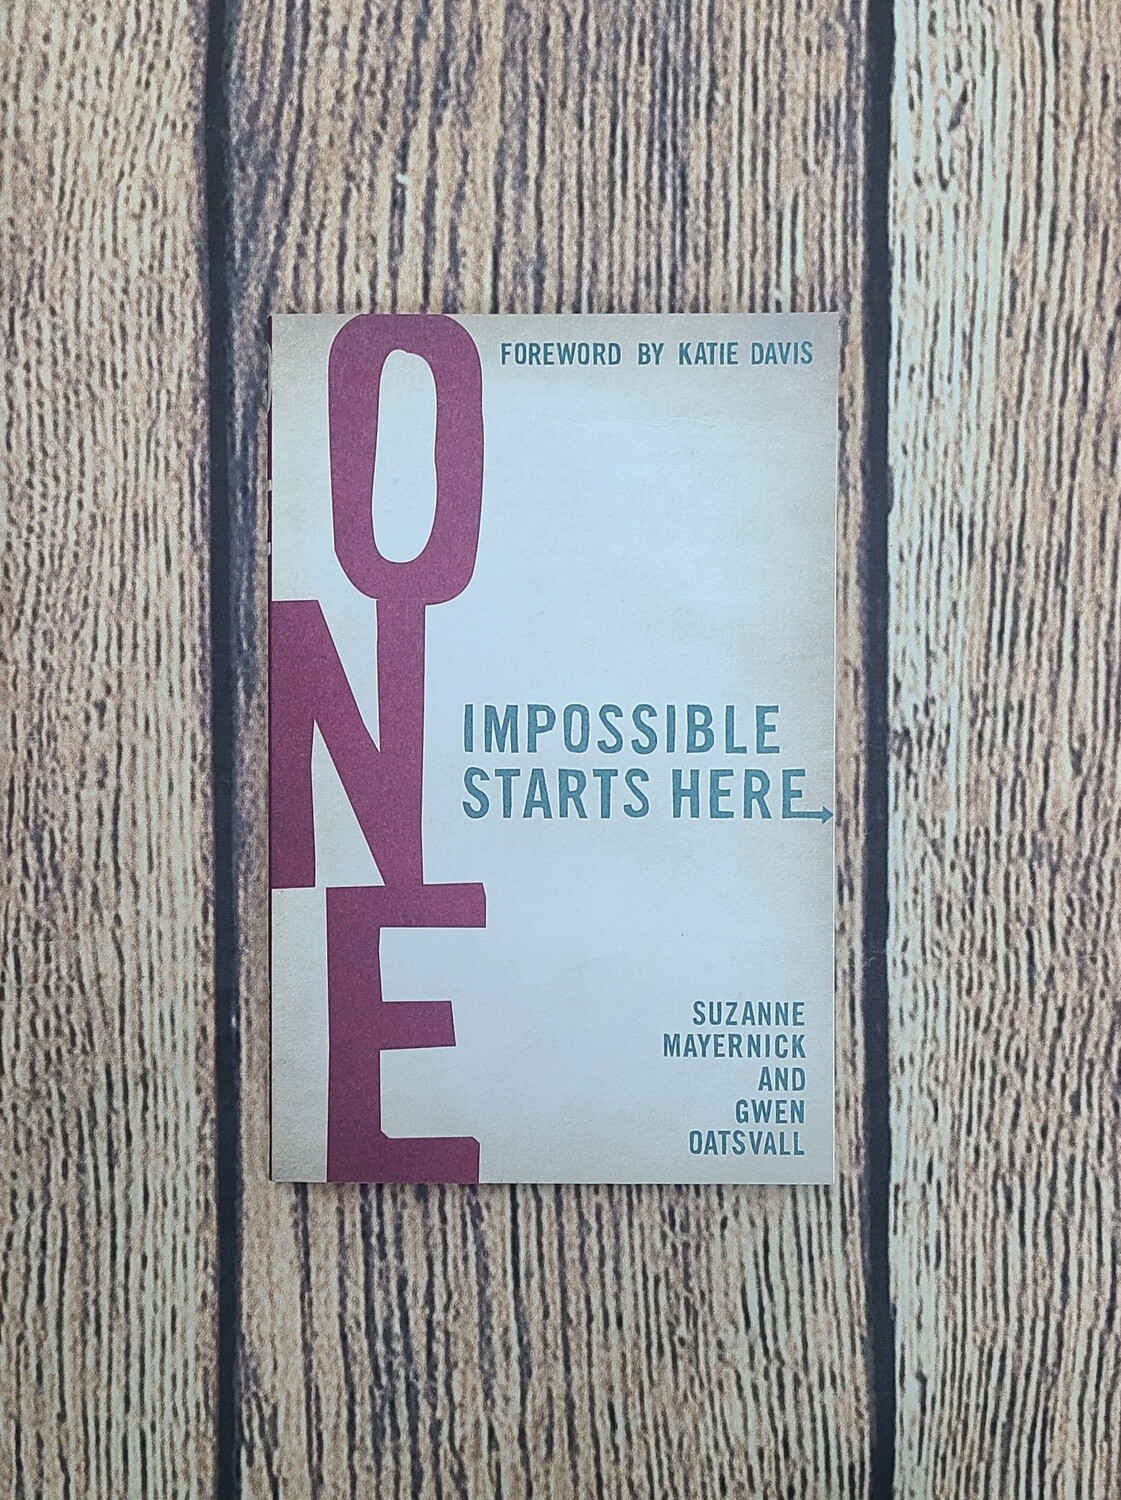 One: Impossible Starts Here by Suzanne Mayernick and Gwen Oatsvall